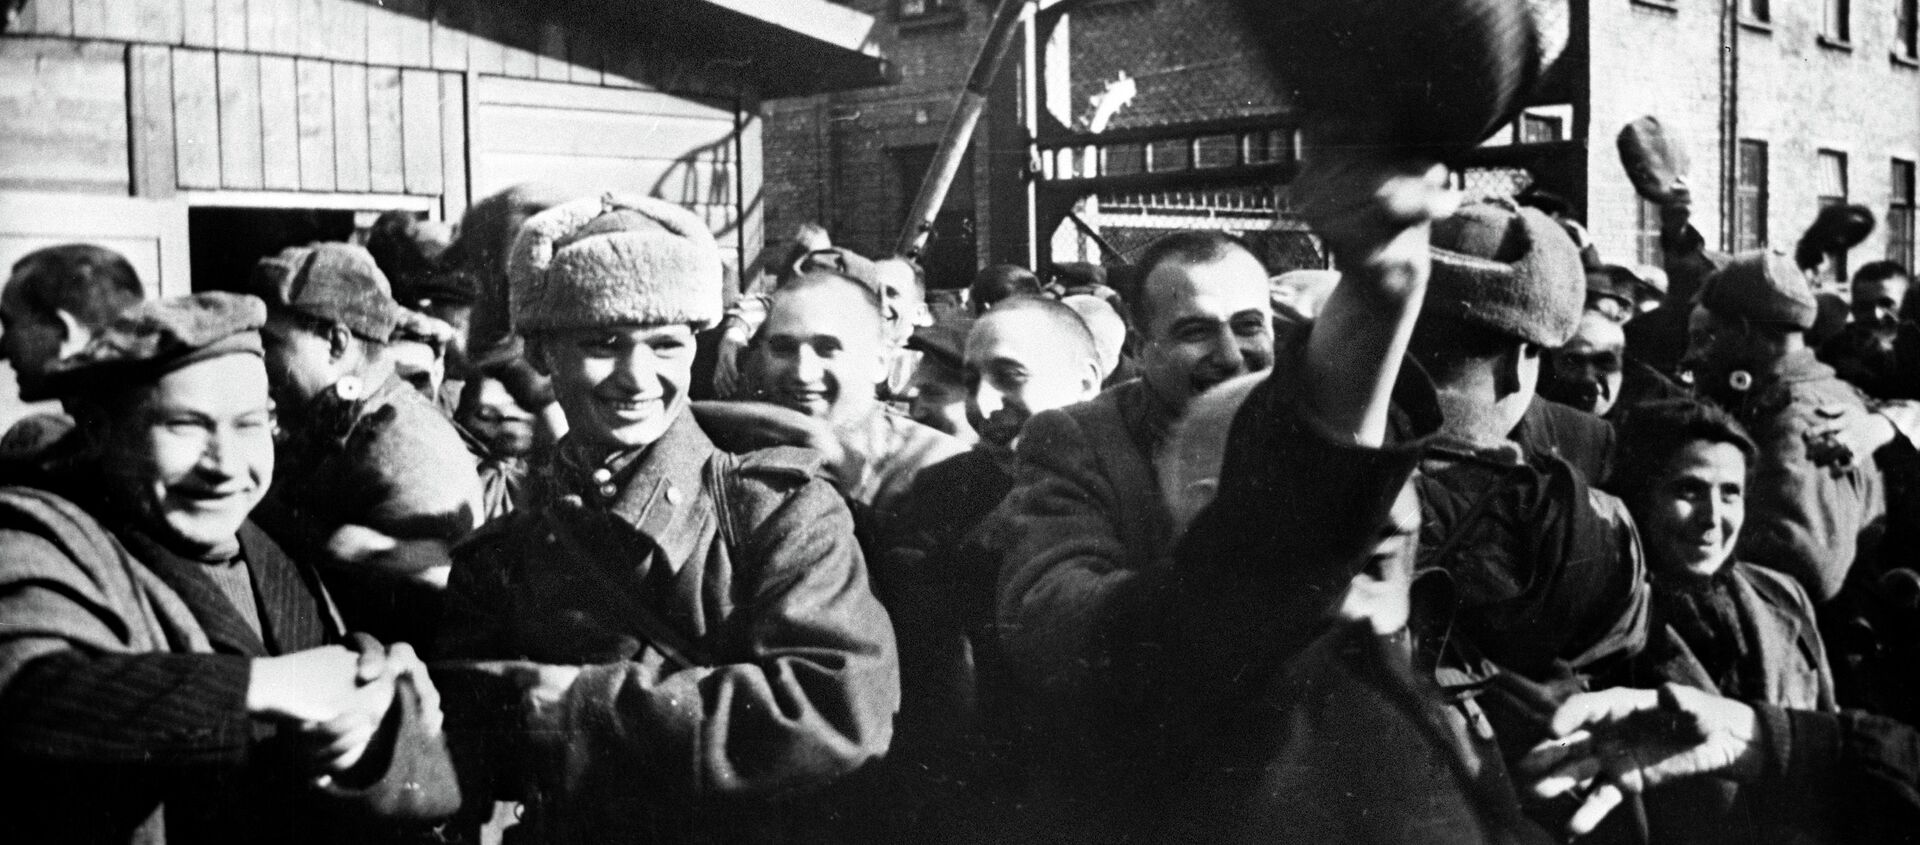 Second World War of 1939-1945. Prisoner's of Oswiecim at first minutes after they were released by Soviet soldiers. January of 1945. (File) - Sputnik International, 1920, 09.05.2018